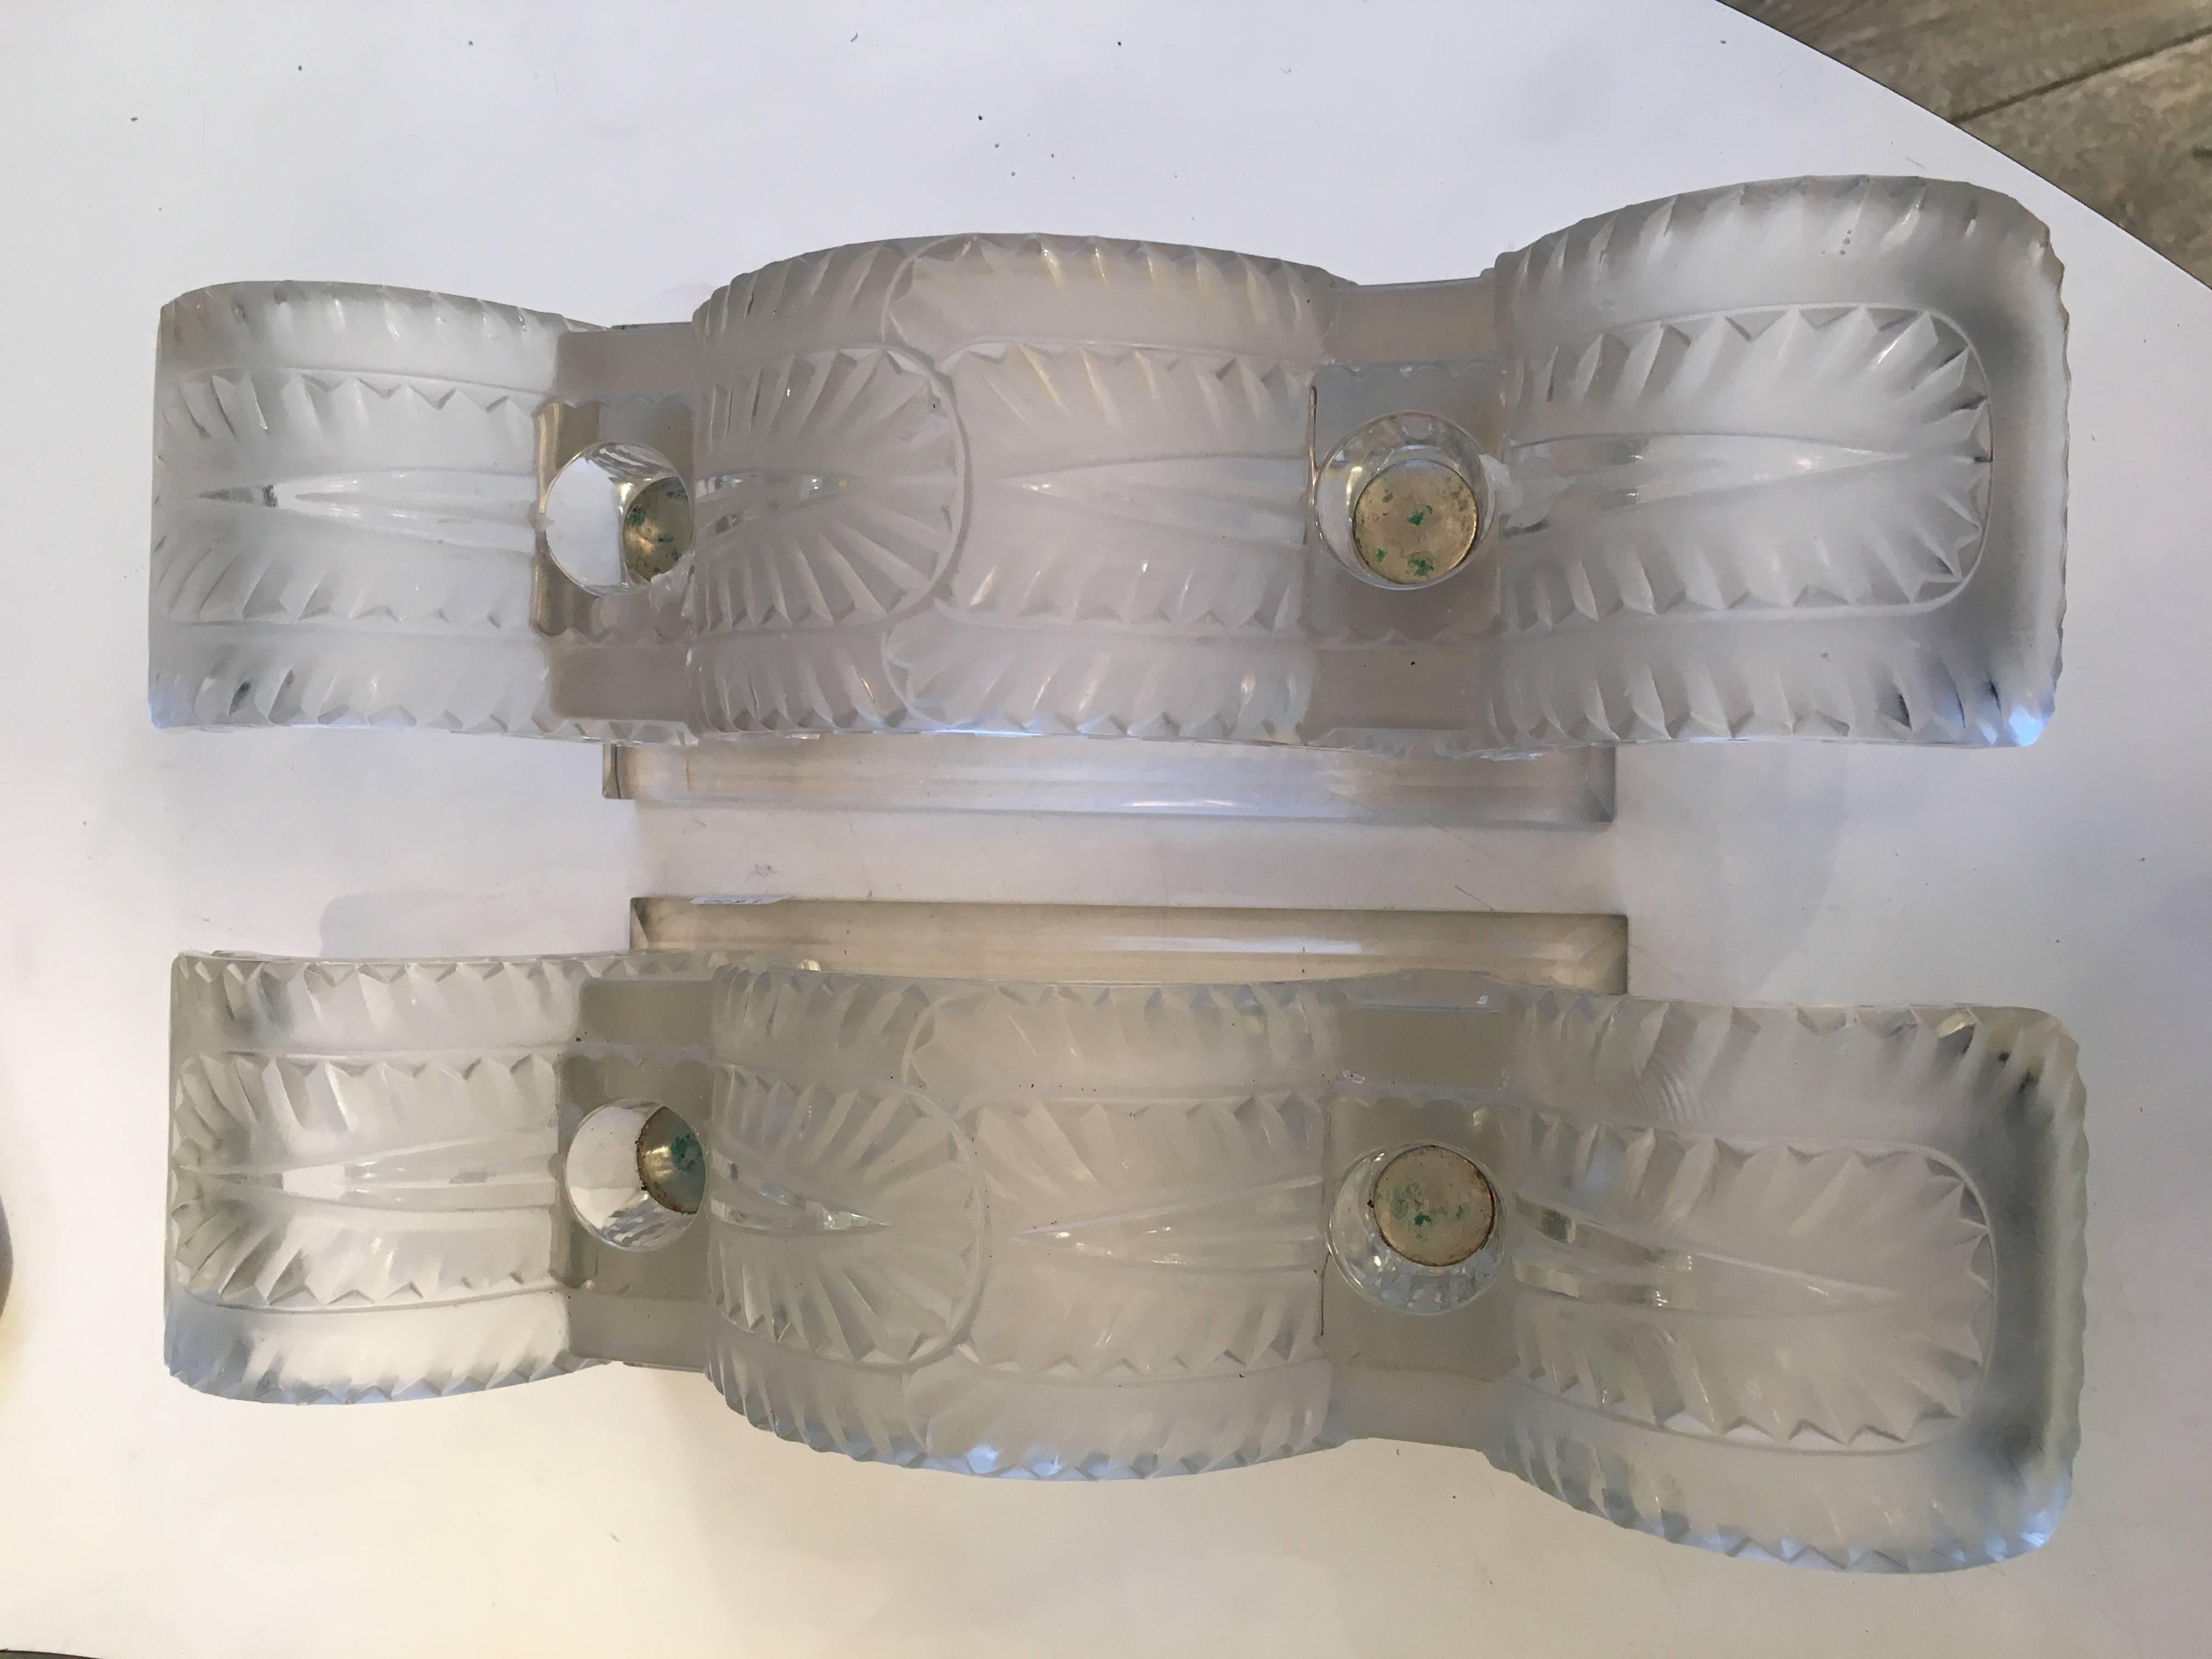 Pair of candleholder model" Porquerolles". 
Design of leaf decorated rolling horizontal scroll shaped thick glass on rectangular base model "Porquerolles". 
31 centimetres long by over 9 centimetres high.
Lalique Jardiniere